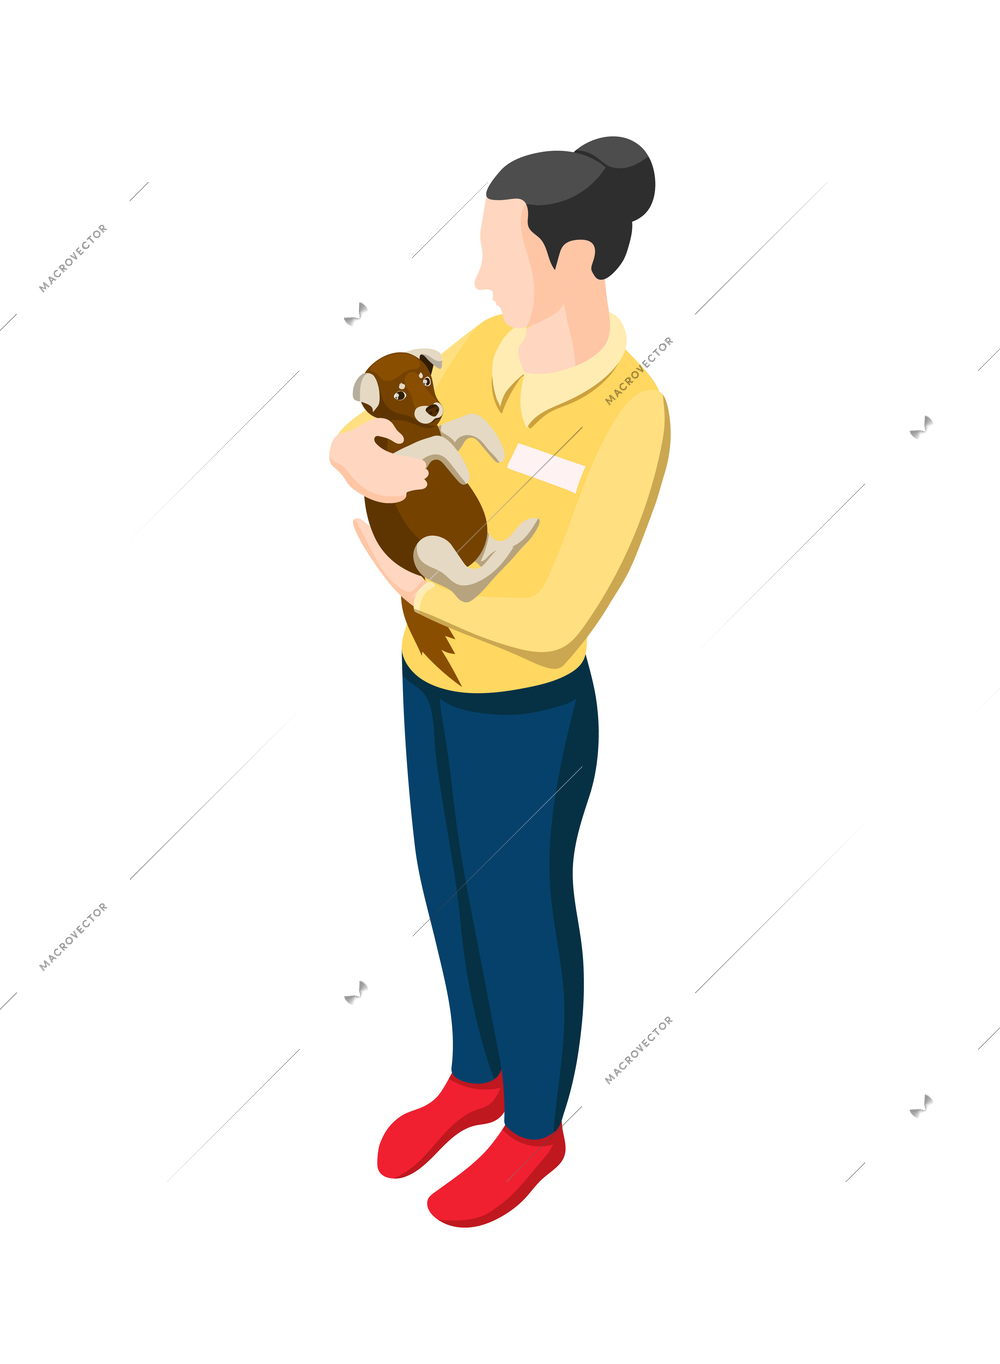 Animal care volunteering isometric icon with woman holding cute puppy vector illustration